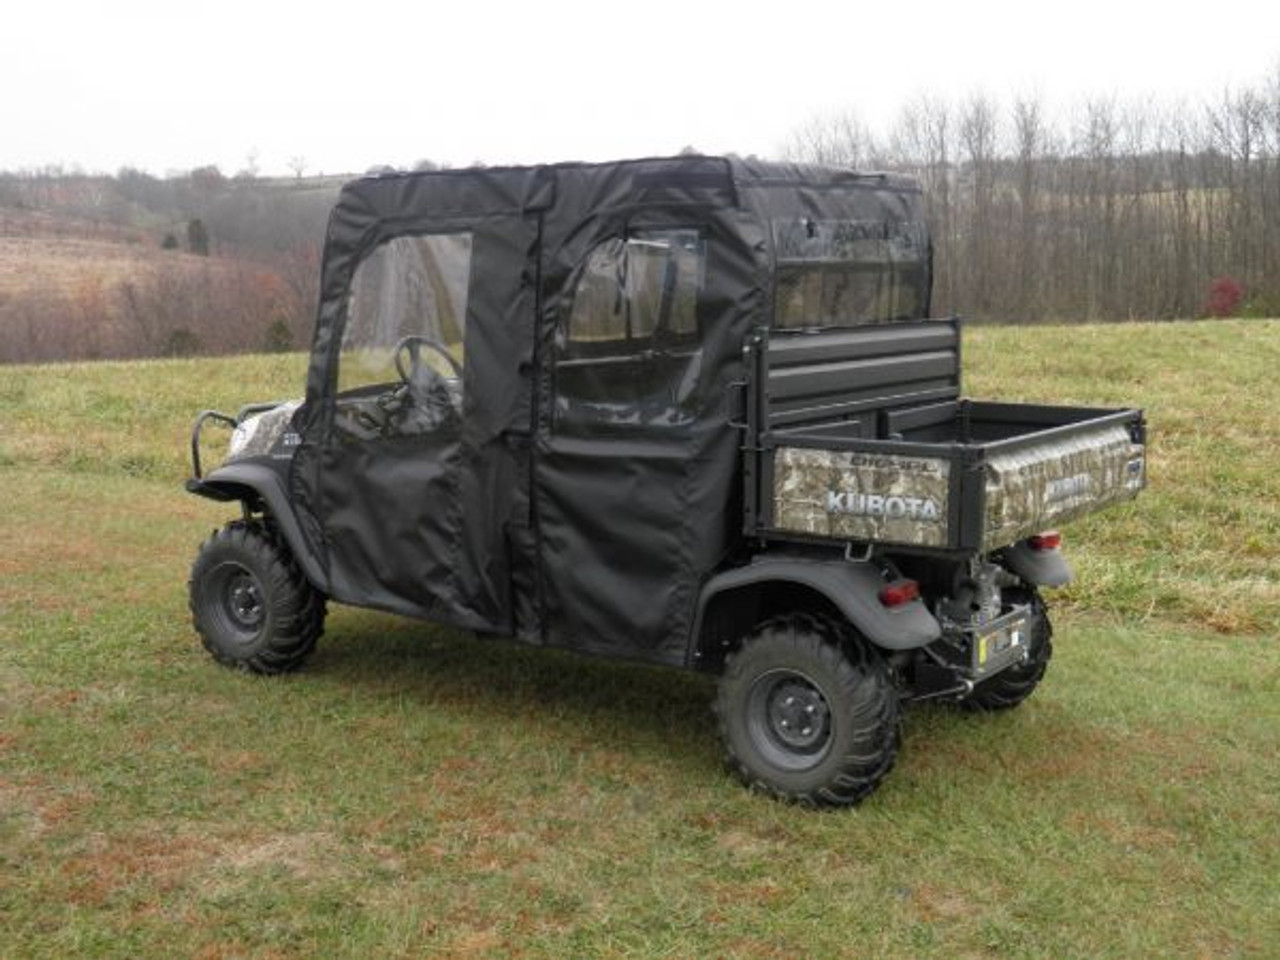 3 Star side x side Kubota RTV X1140 full cab enclosure rear and side angle view